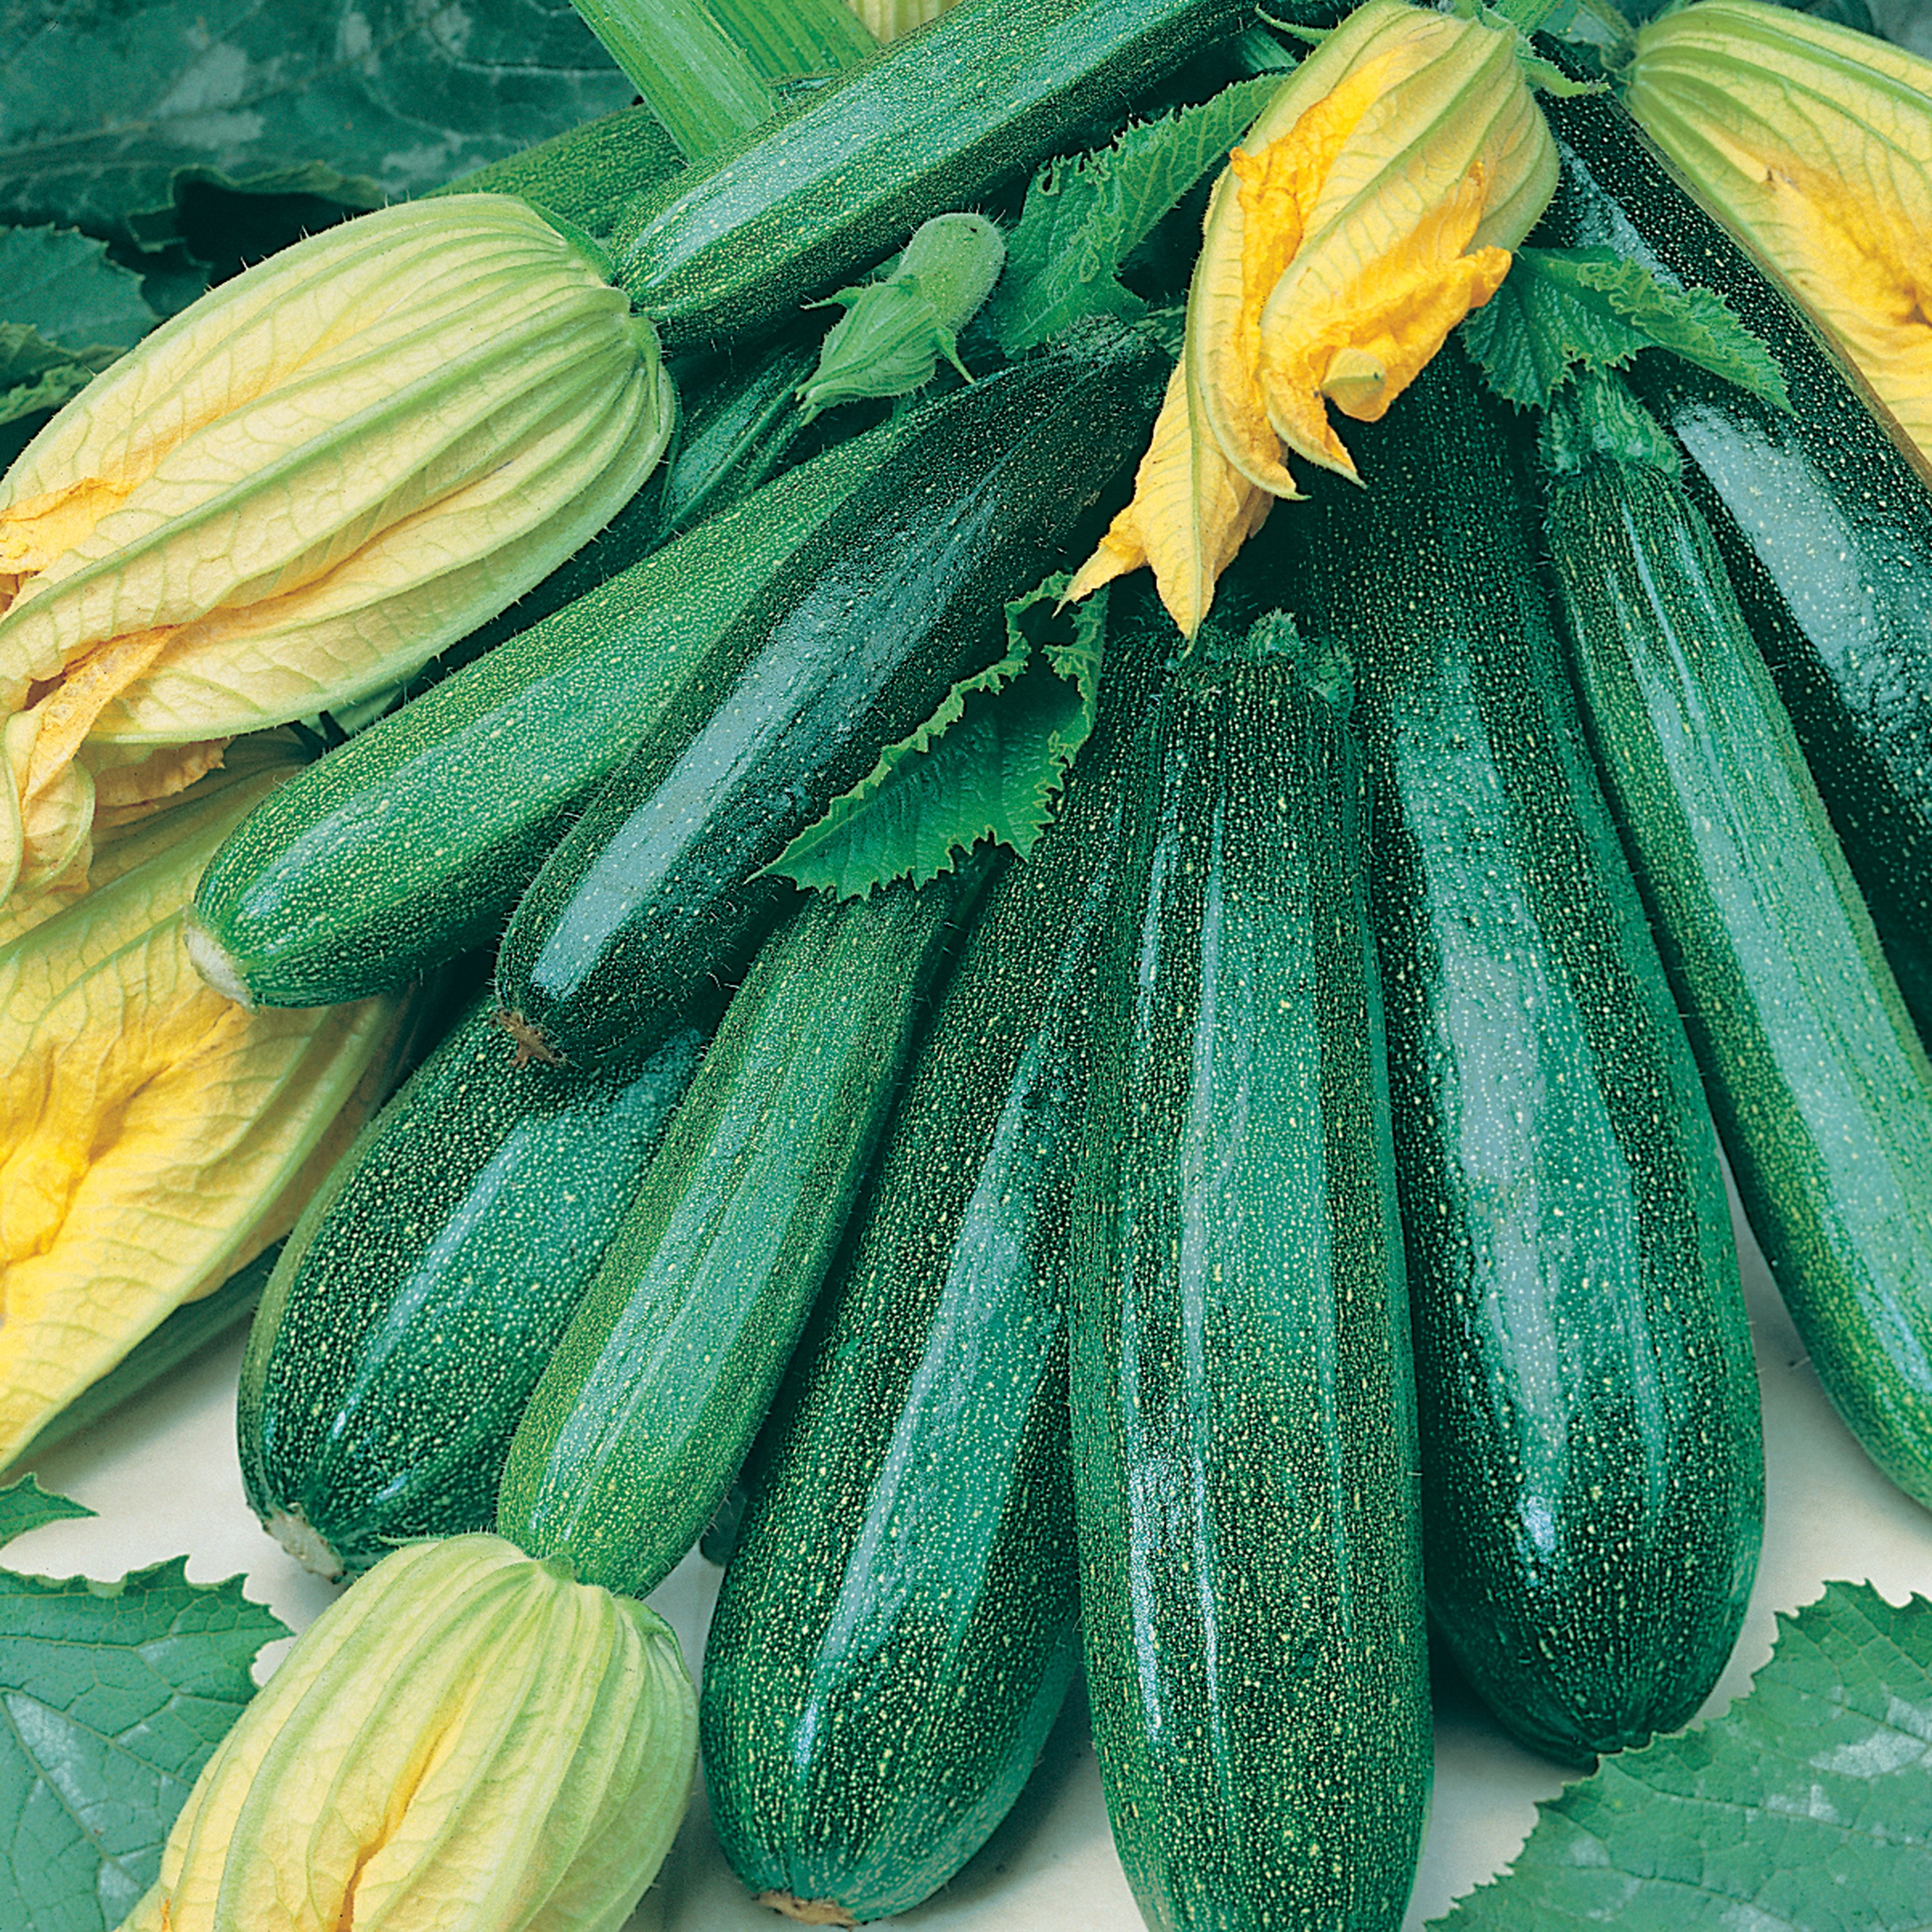 All Green Bush Courgette Seed